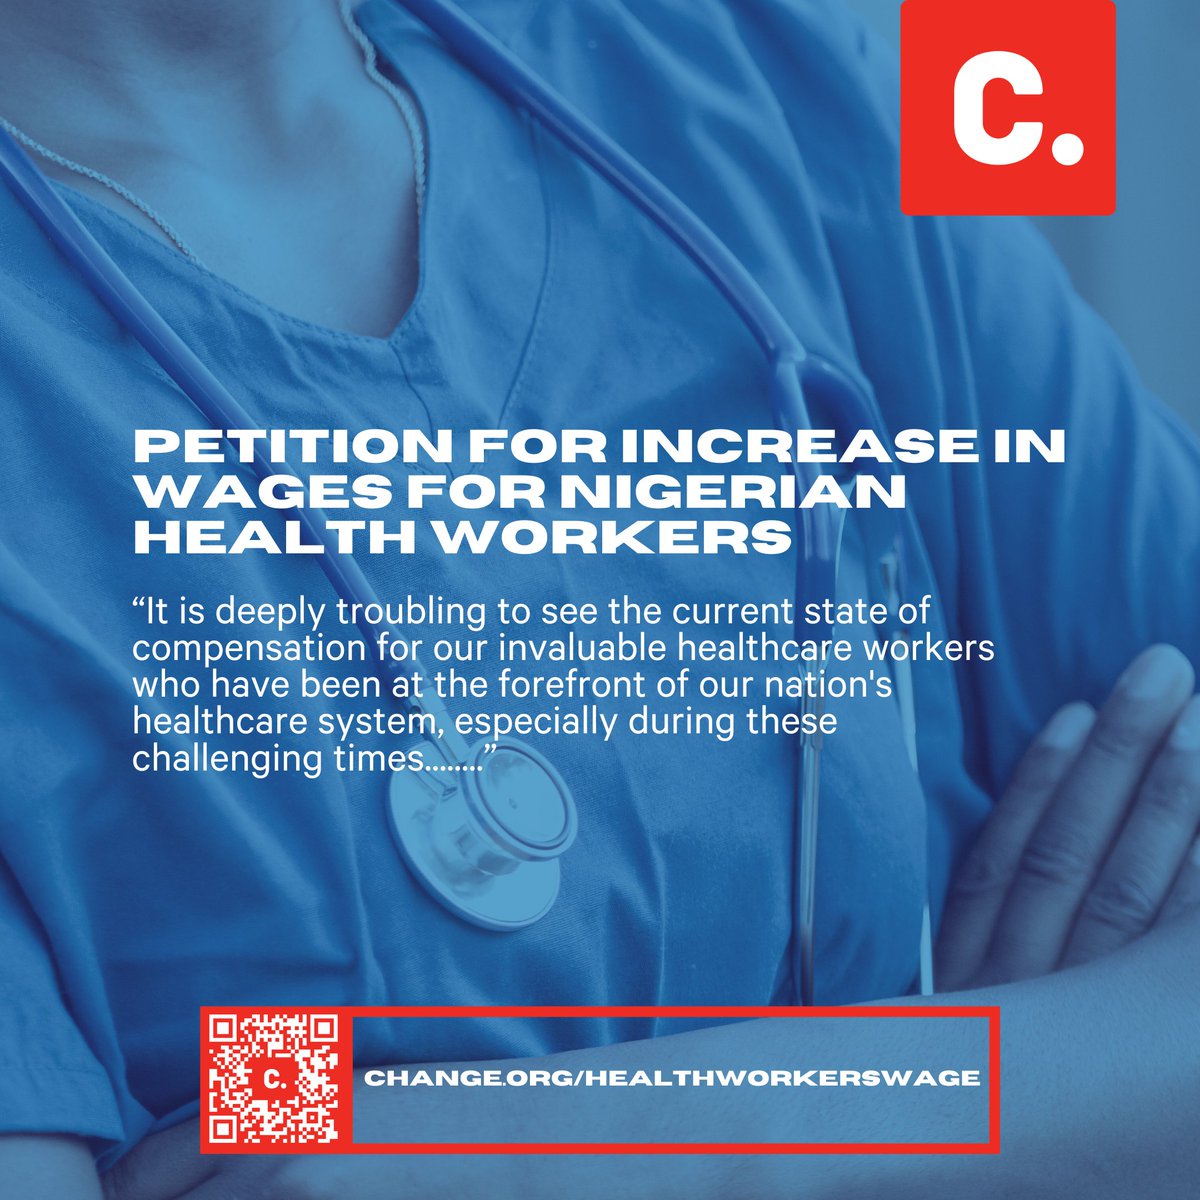 Let's stand with our healthcare heroes in Nigeria. They've been our lifeline in tough times, but their wages and conditions need improvement. Sign the petition to ensure they get the recognition and support they deserve! change.org/HealthworkersW… #FairWagesForHealthWorkers